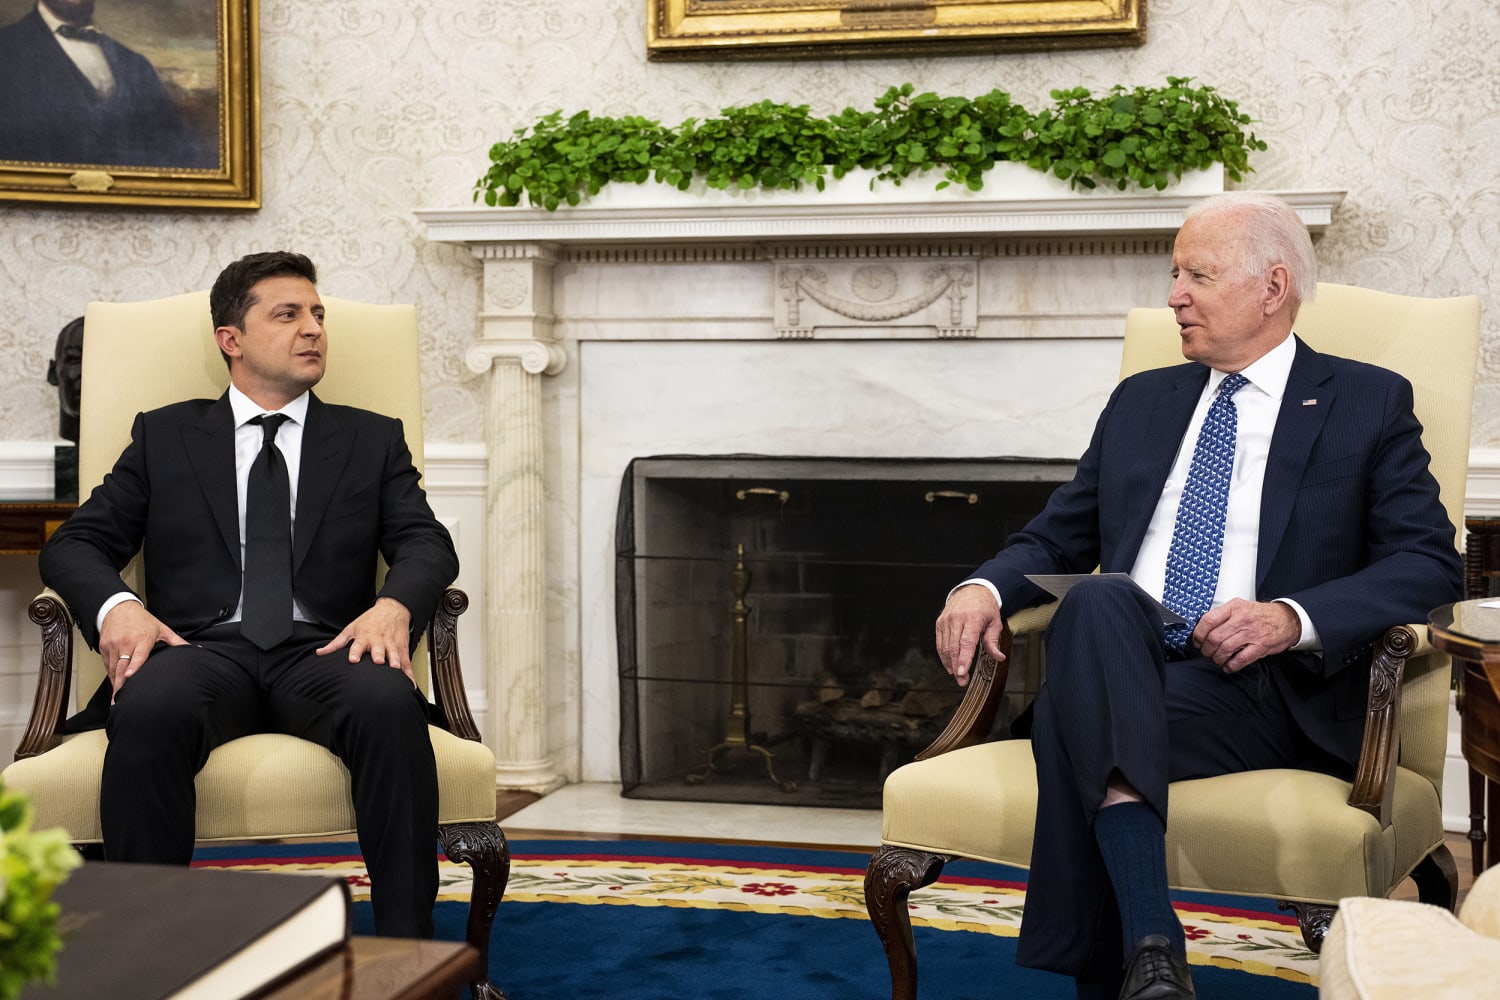 Biden reaffirms U.S. support for Ukraine in call with Zelenskyy amid Russia fears